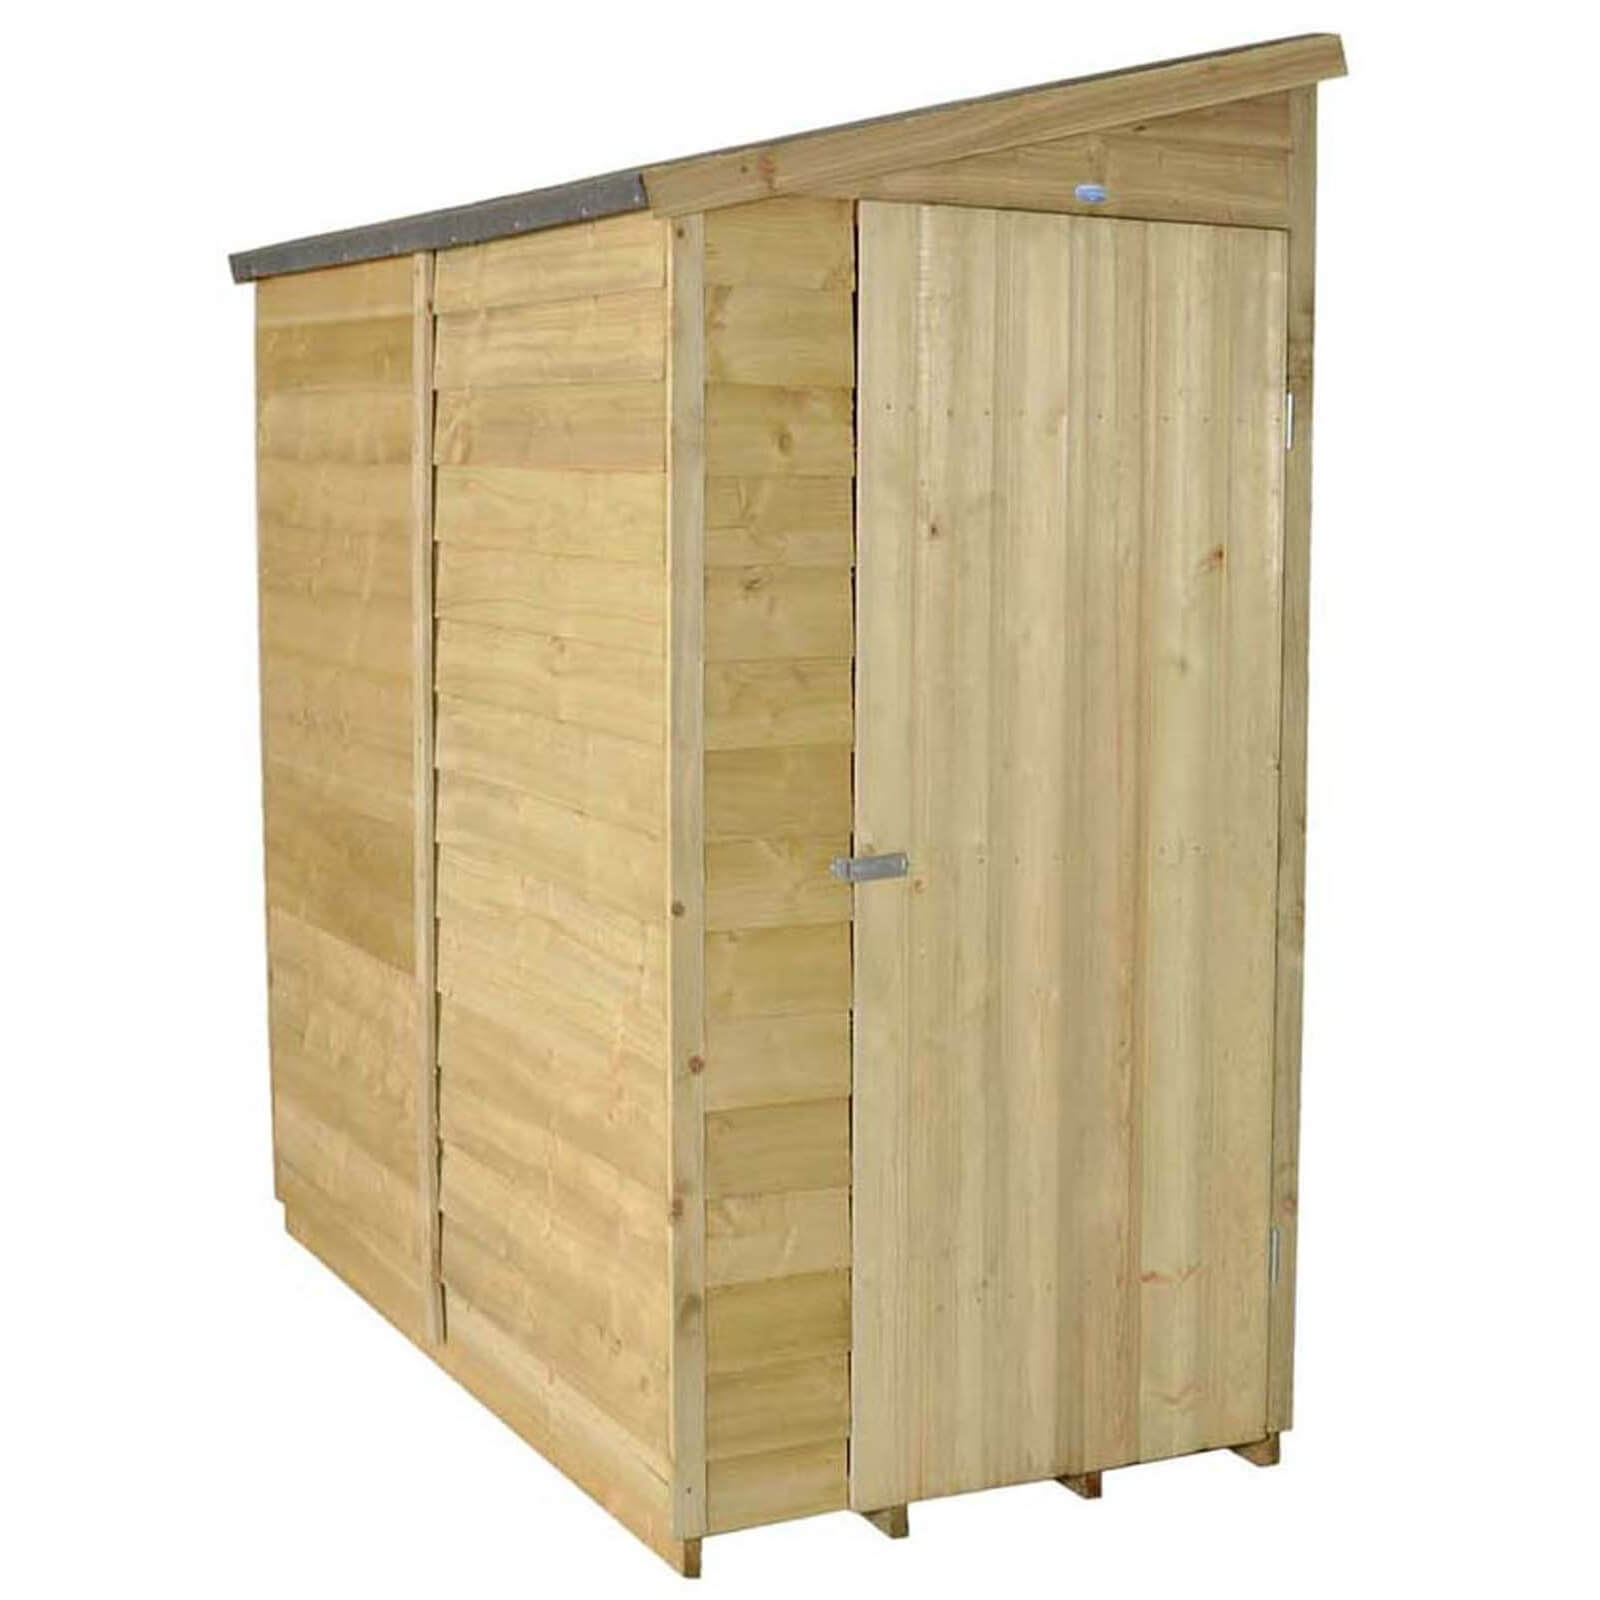 6x3ft Forest Wooden Overlap Pressure Treated Pent Shed -incl. Installation